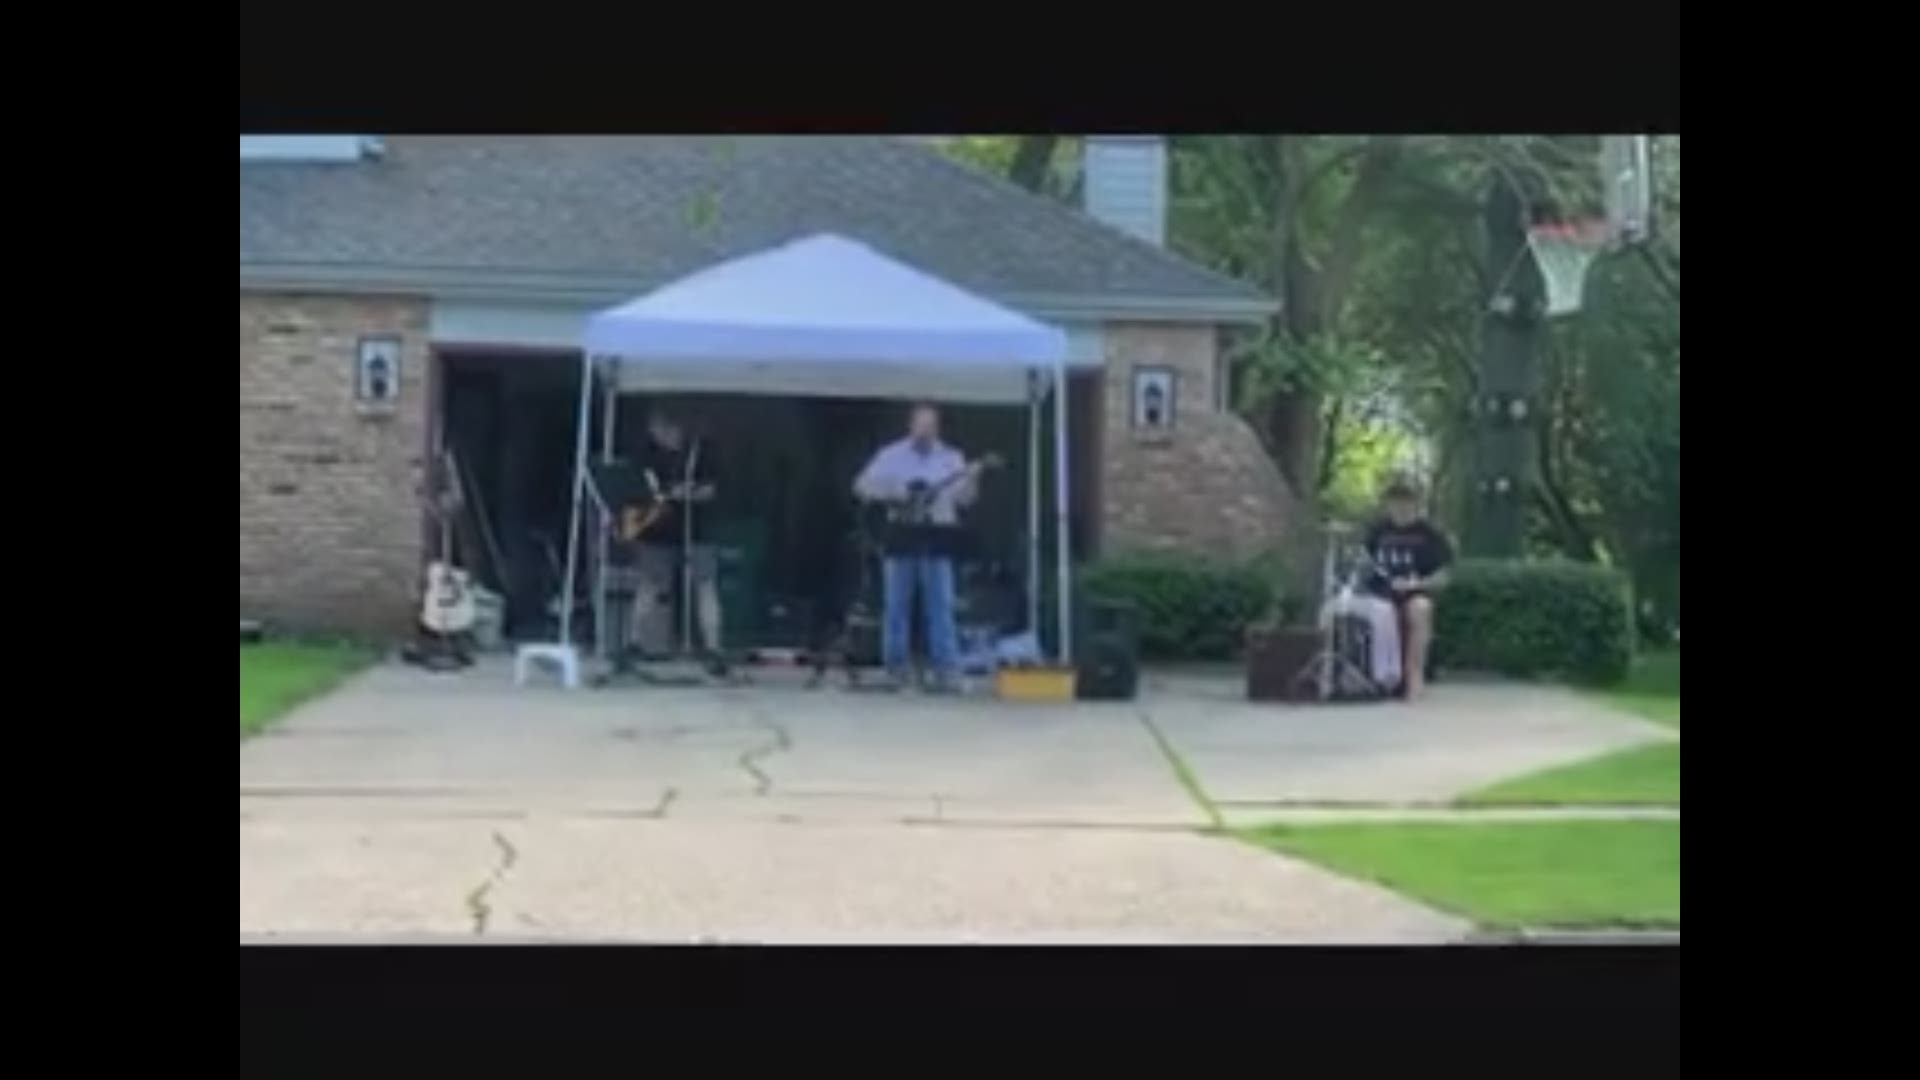 Impromptu concert gives West Des Moines neighbors some social distancing fun